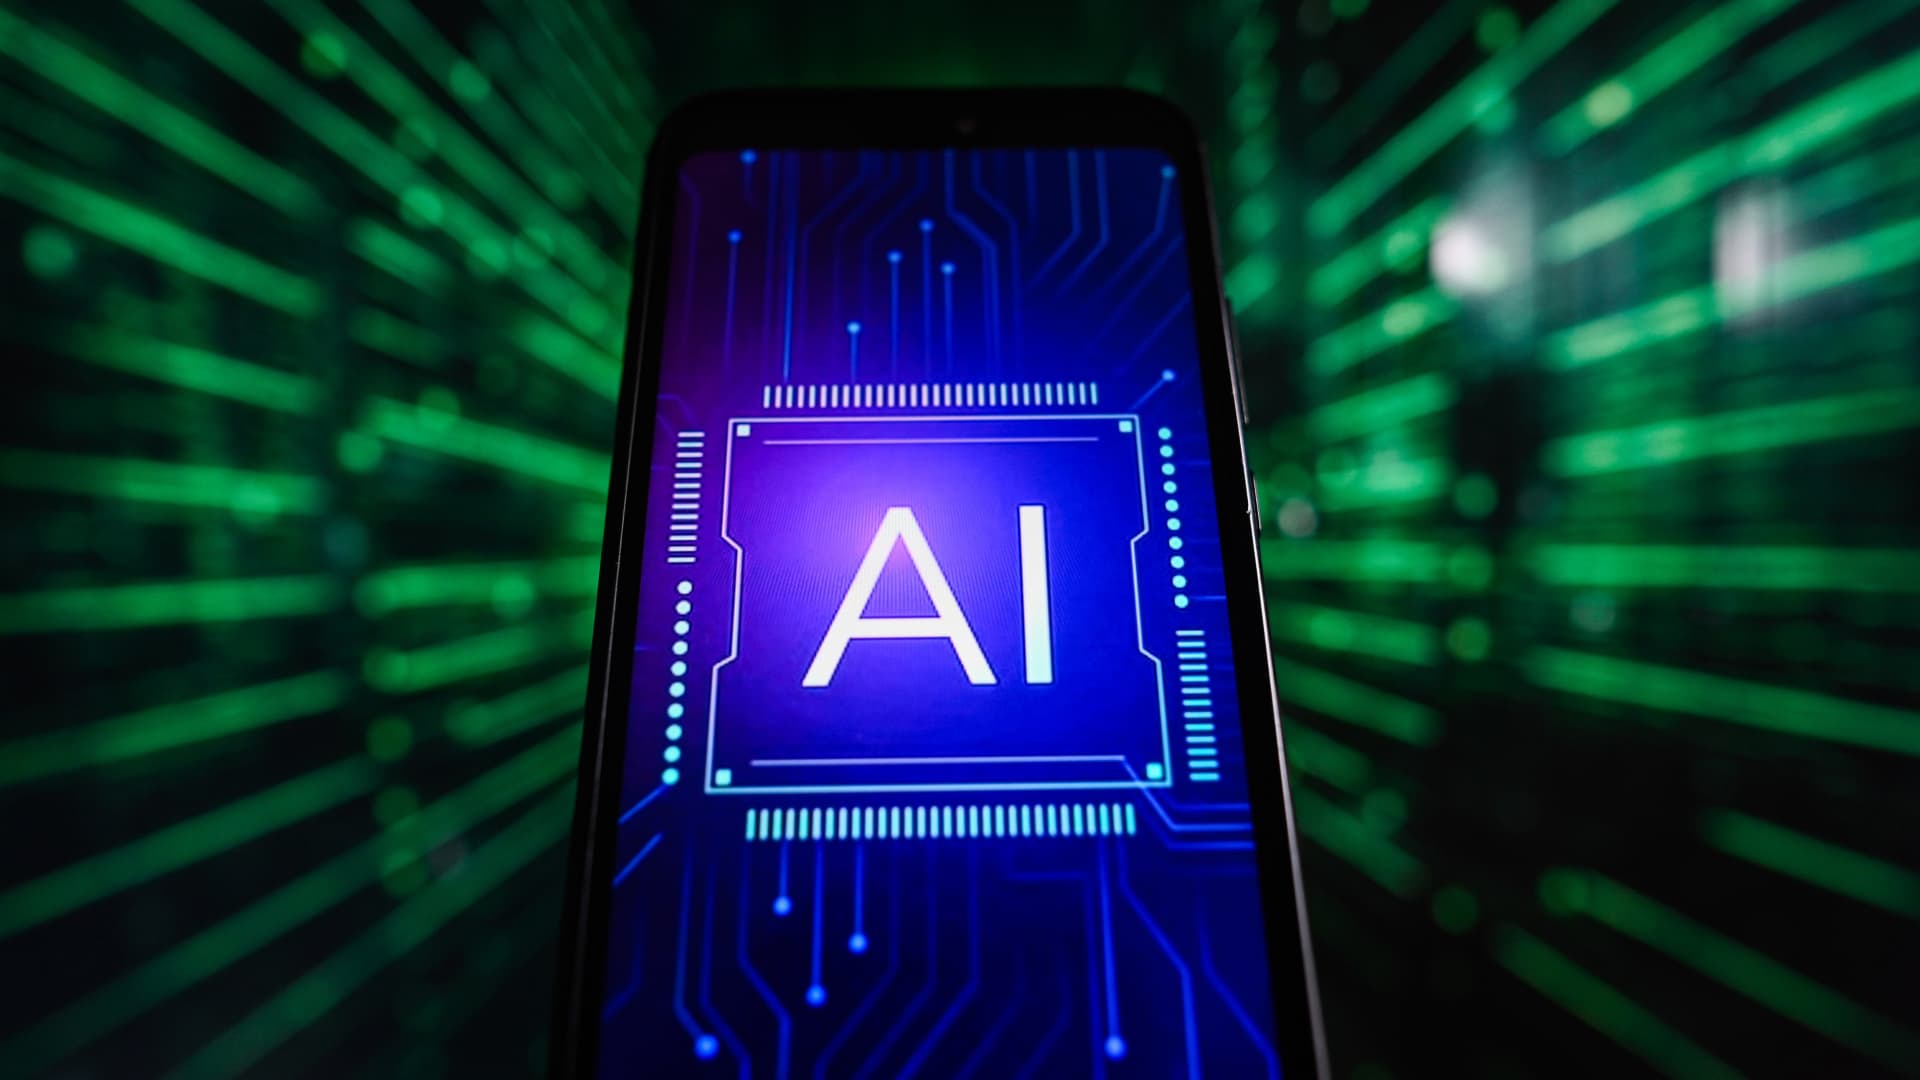  As AI demand picks up, BofA expects 3 key suppliers' stocks to soar